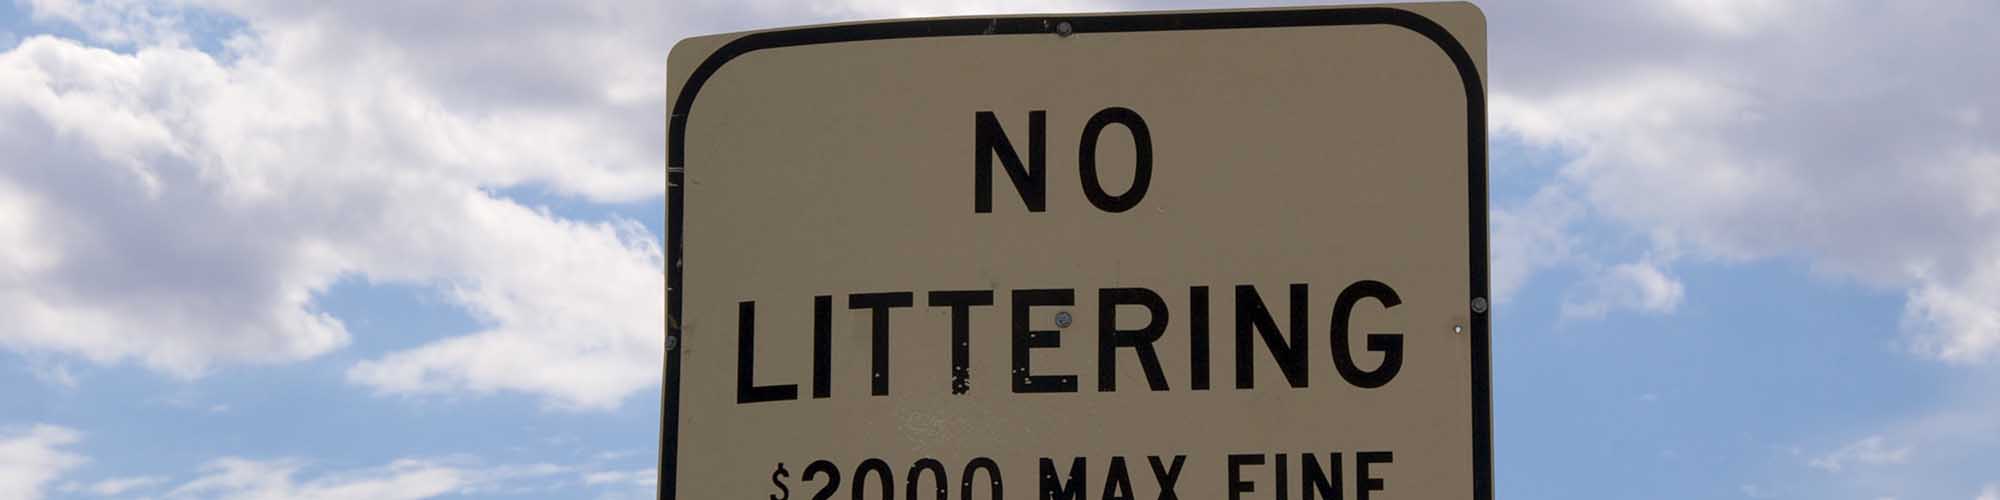 No Littering Sign fines